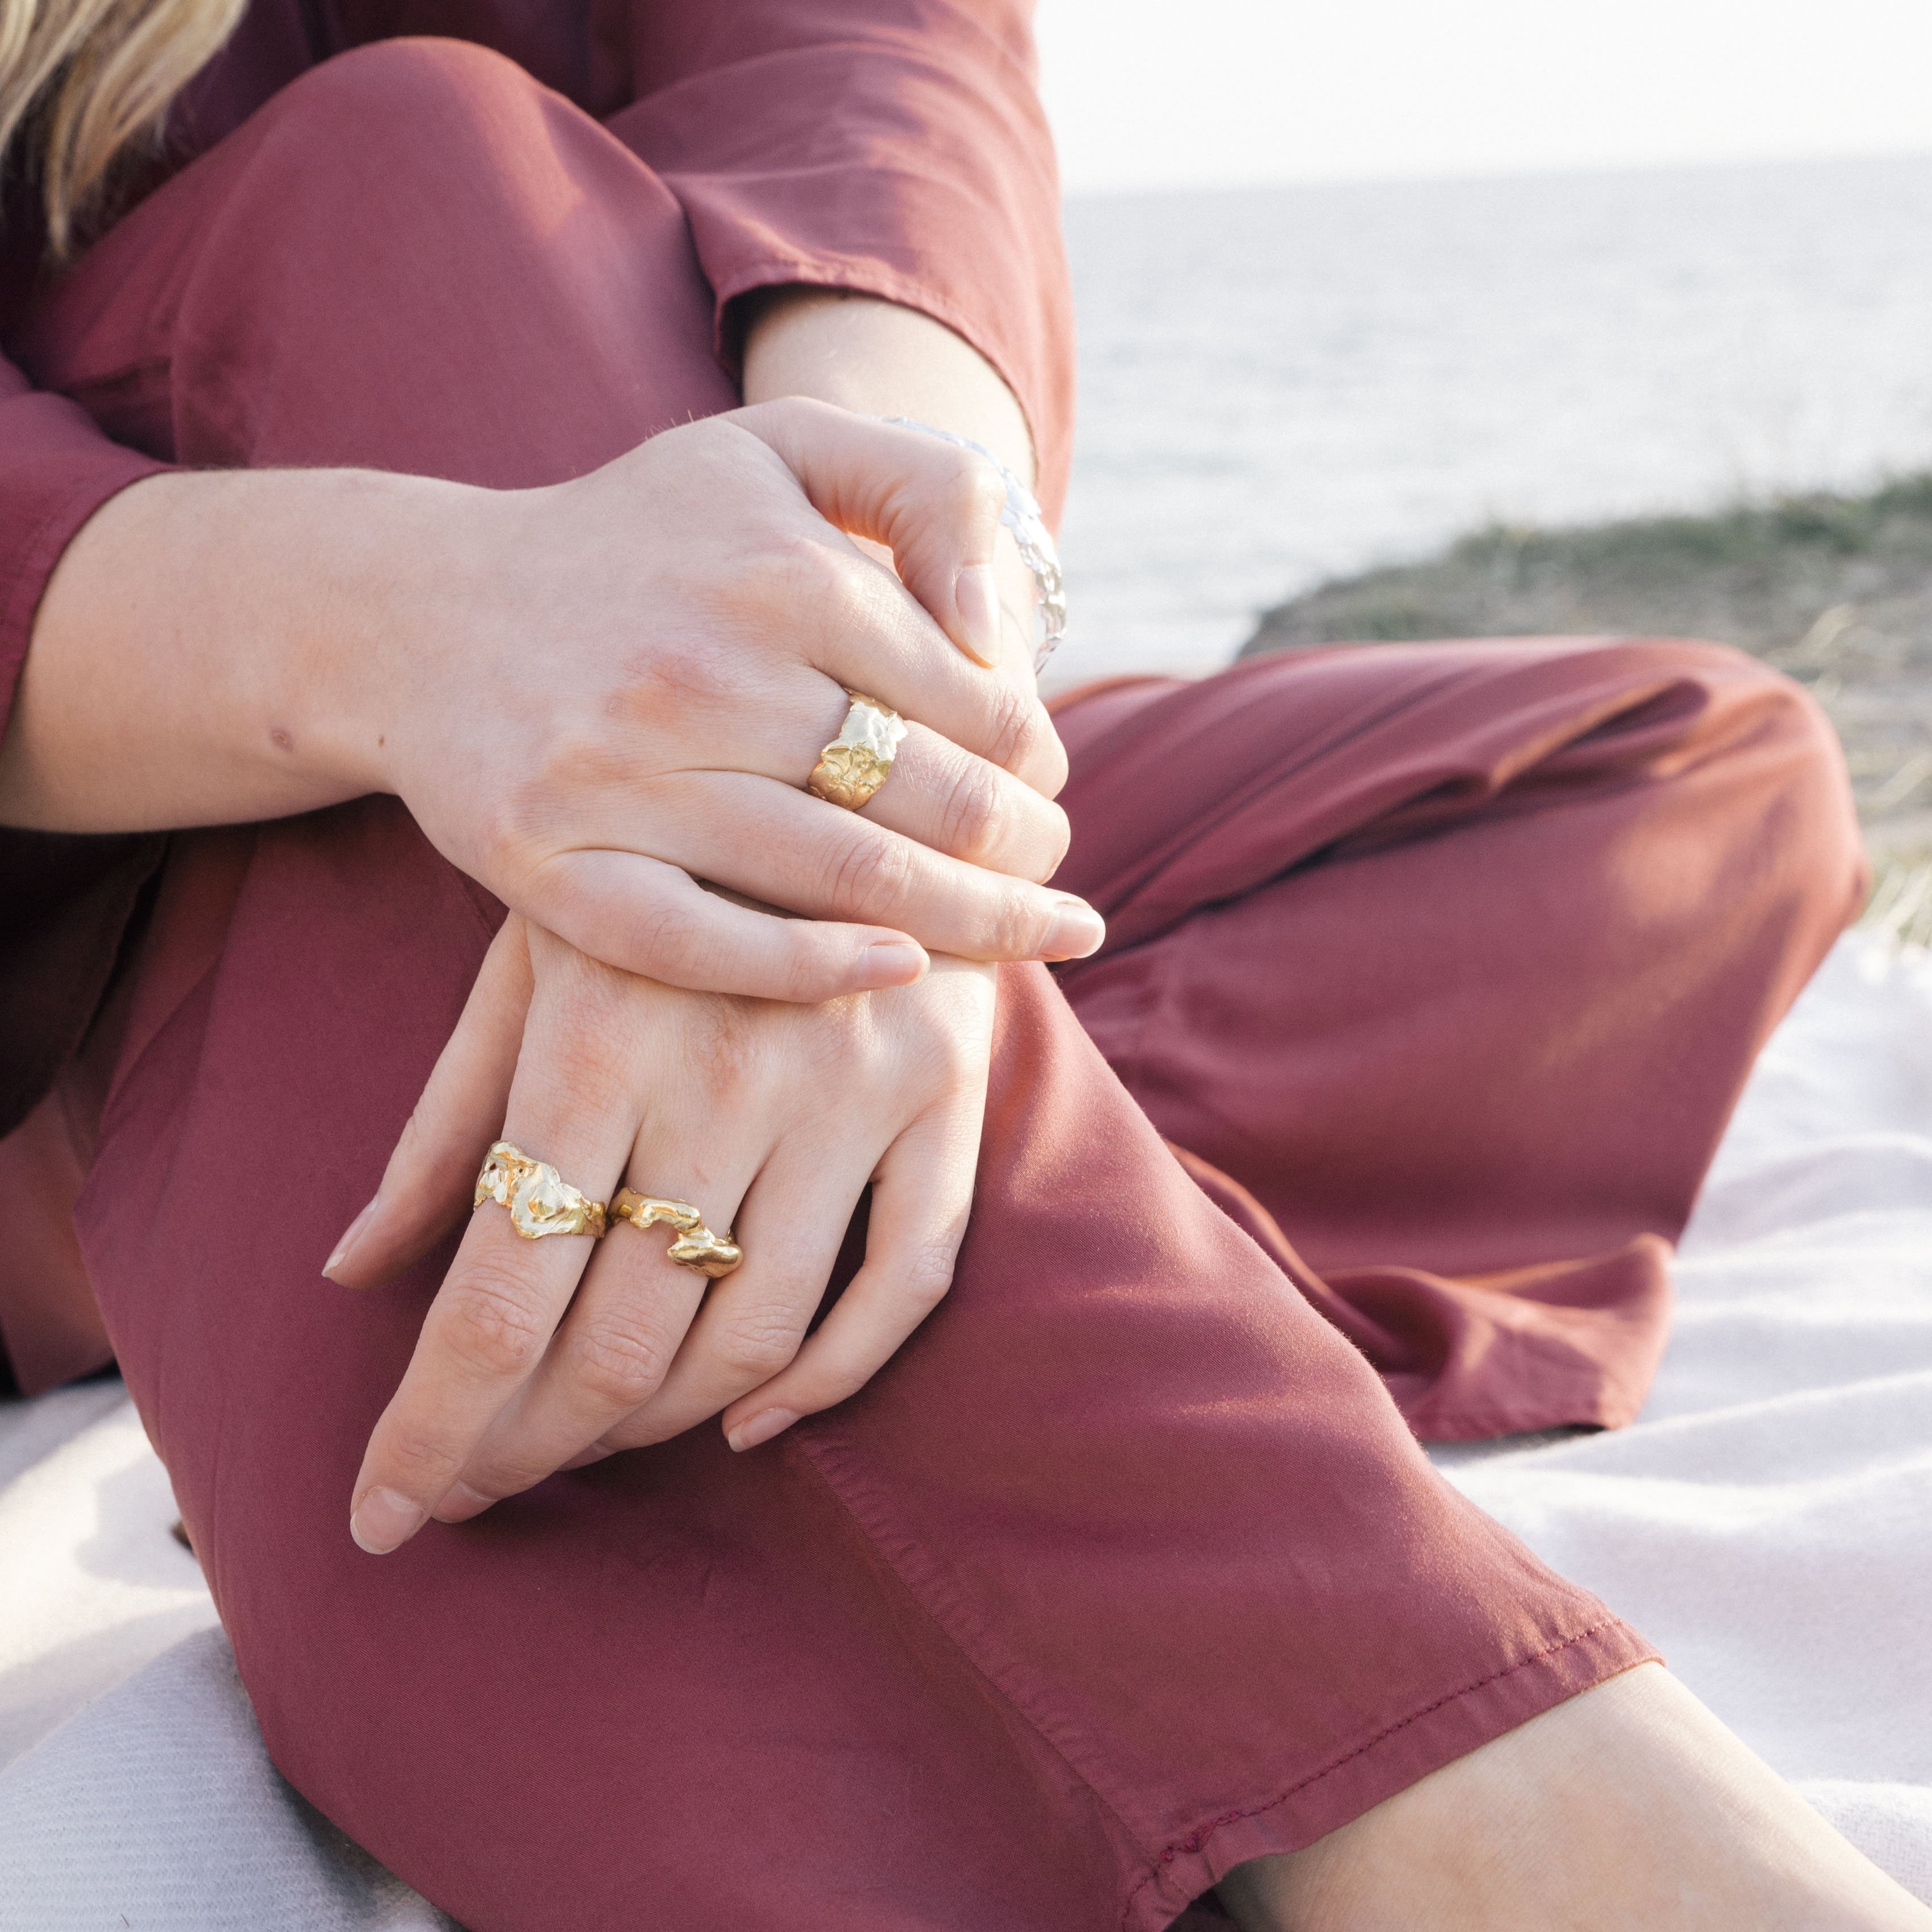 The lava ring appears to have been moulded from the ocean itself. Inspired by molten lava spilling into cool water to create organic and unique sculptures. Enjoy this treasure wrapped around your finger everyday and feel a little closer to the ocean.